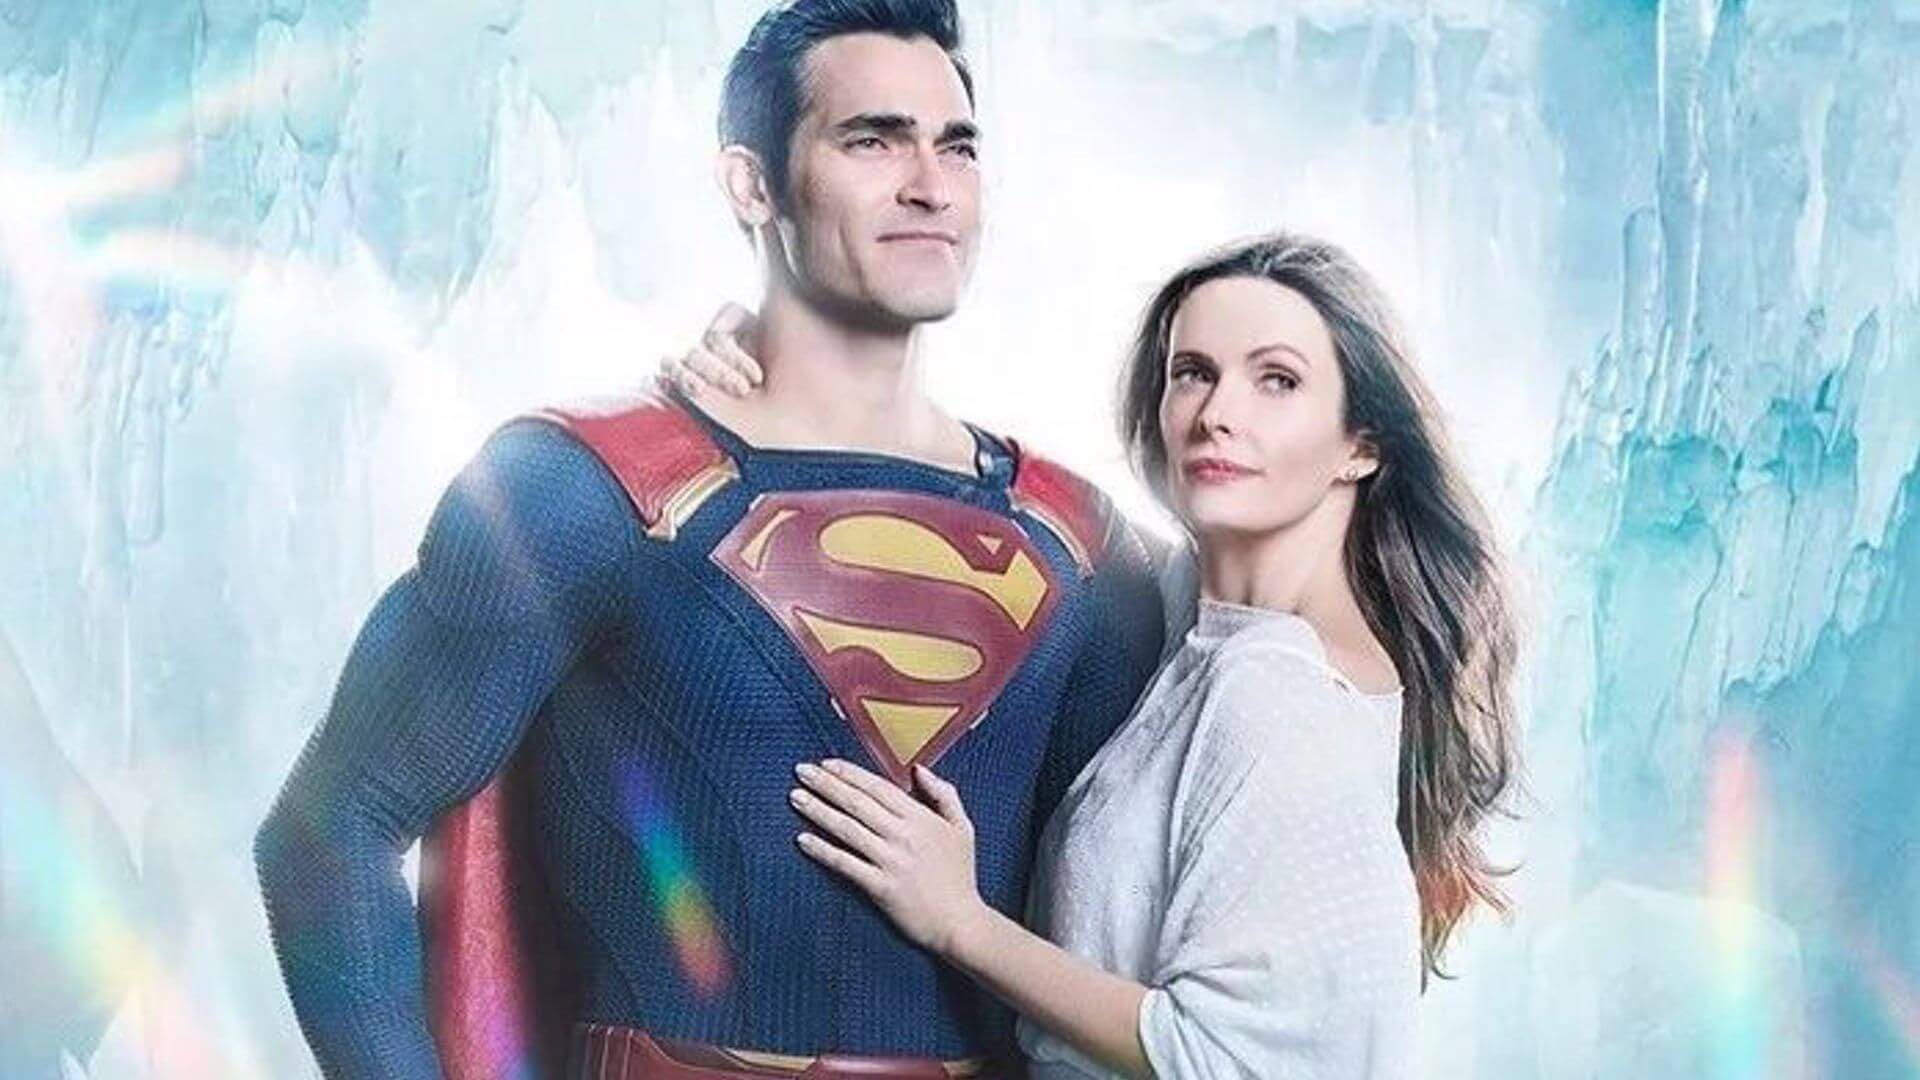 The CW Release First Trailer for Superman & Lois